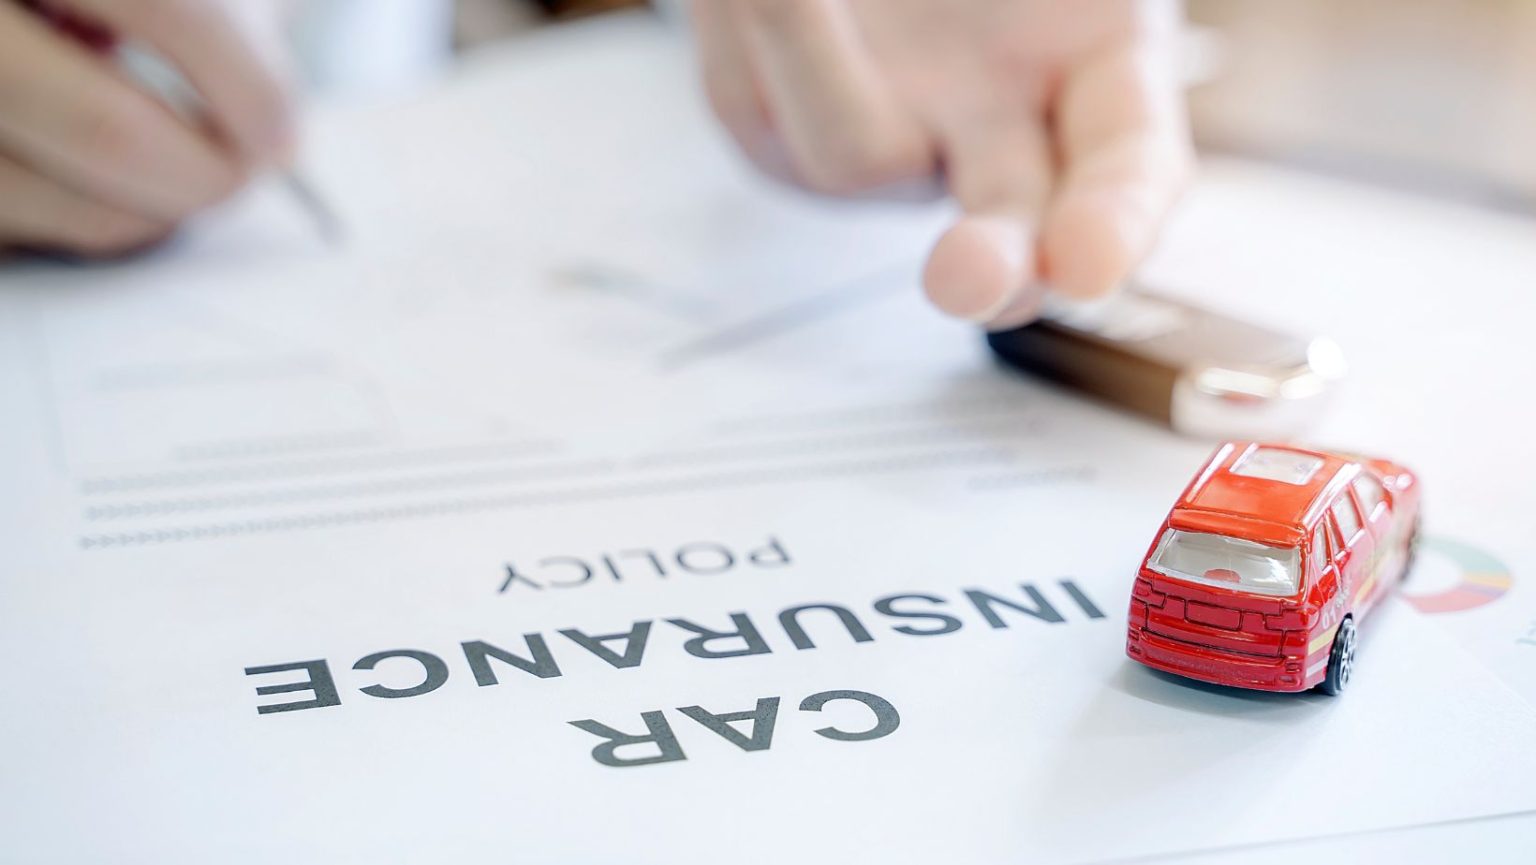 A close-up of a toy car on a car insurance document.